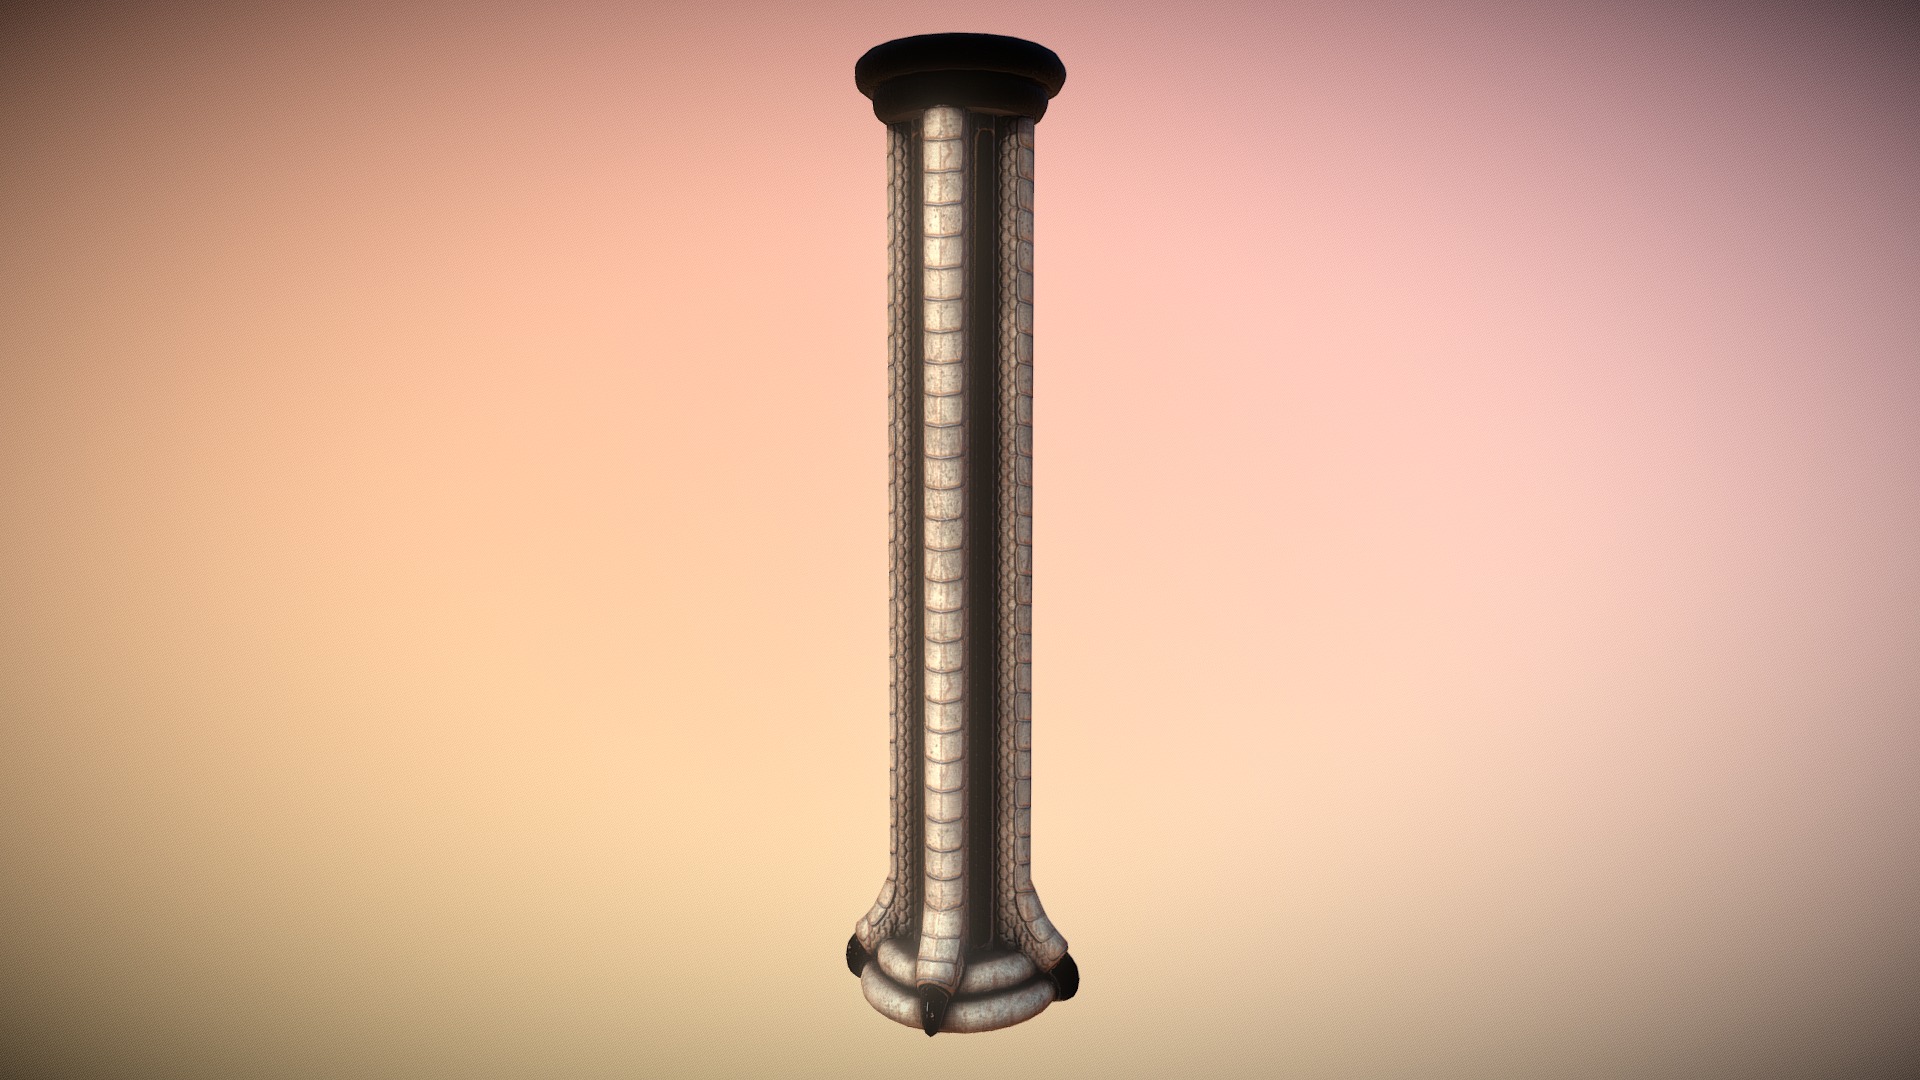 3D model Col13 - This is a 3D model of the Col13. The 3D model is about a close-up of a flashlight.